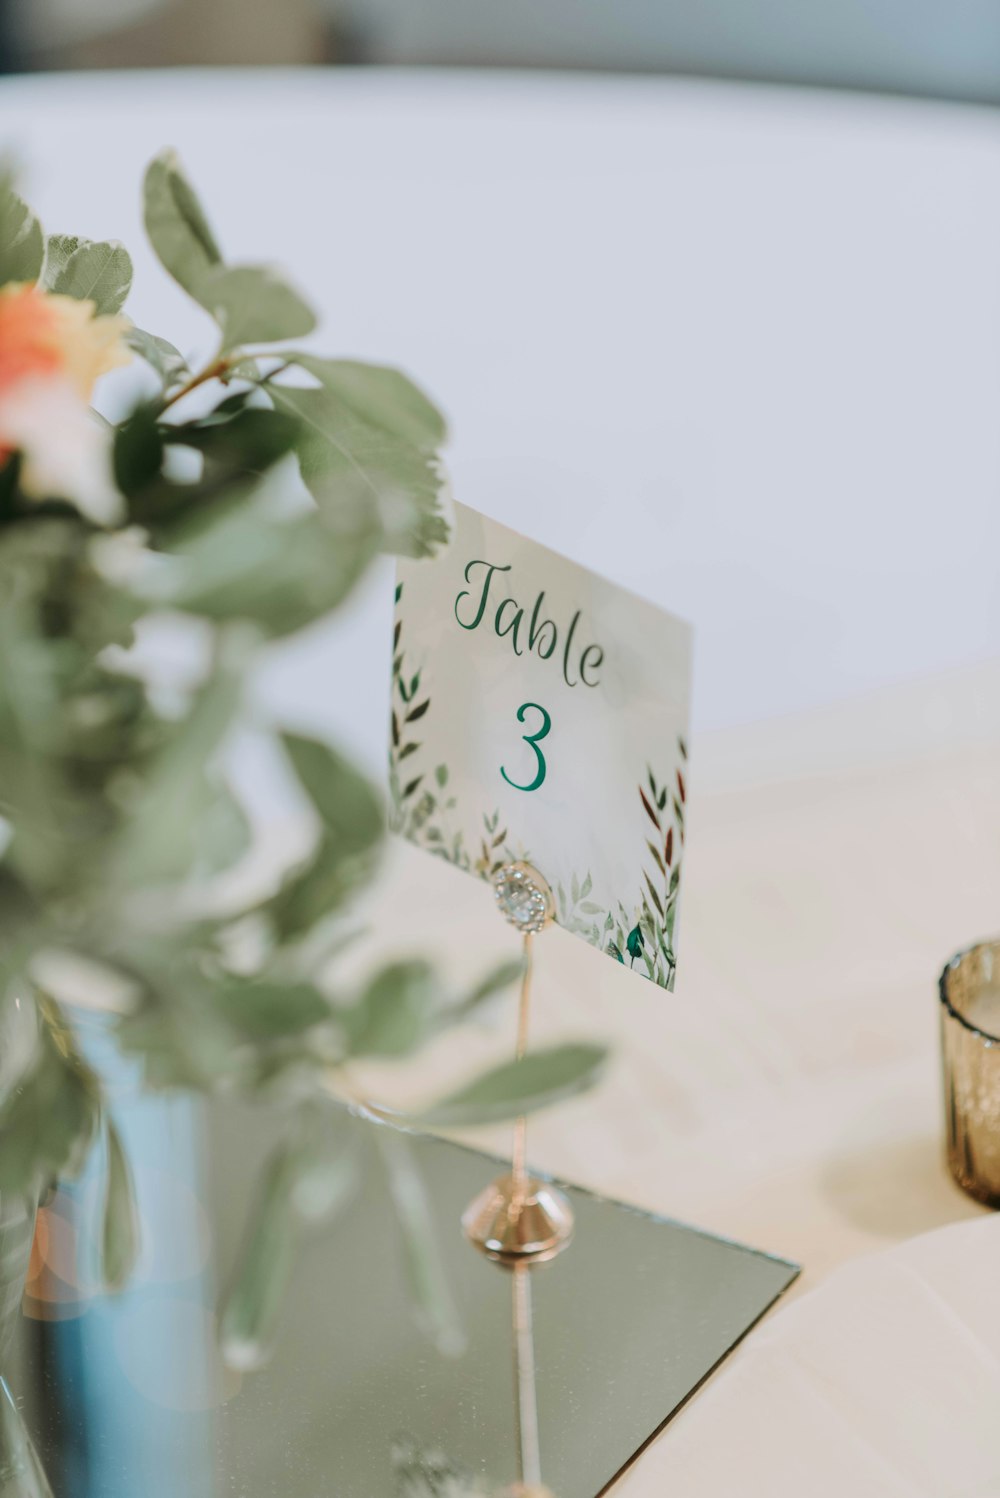 a table number on a table with a vase of flowers